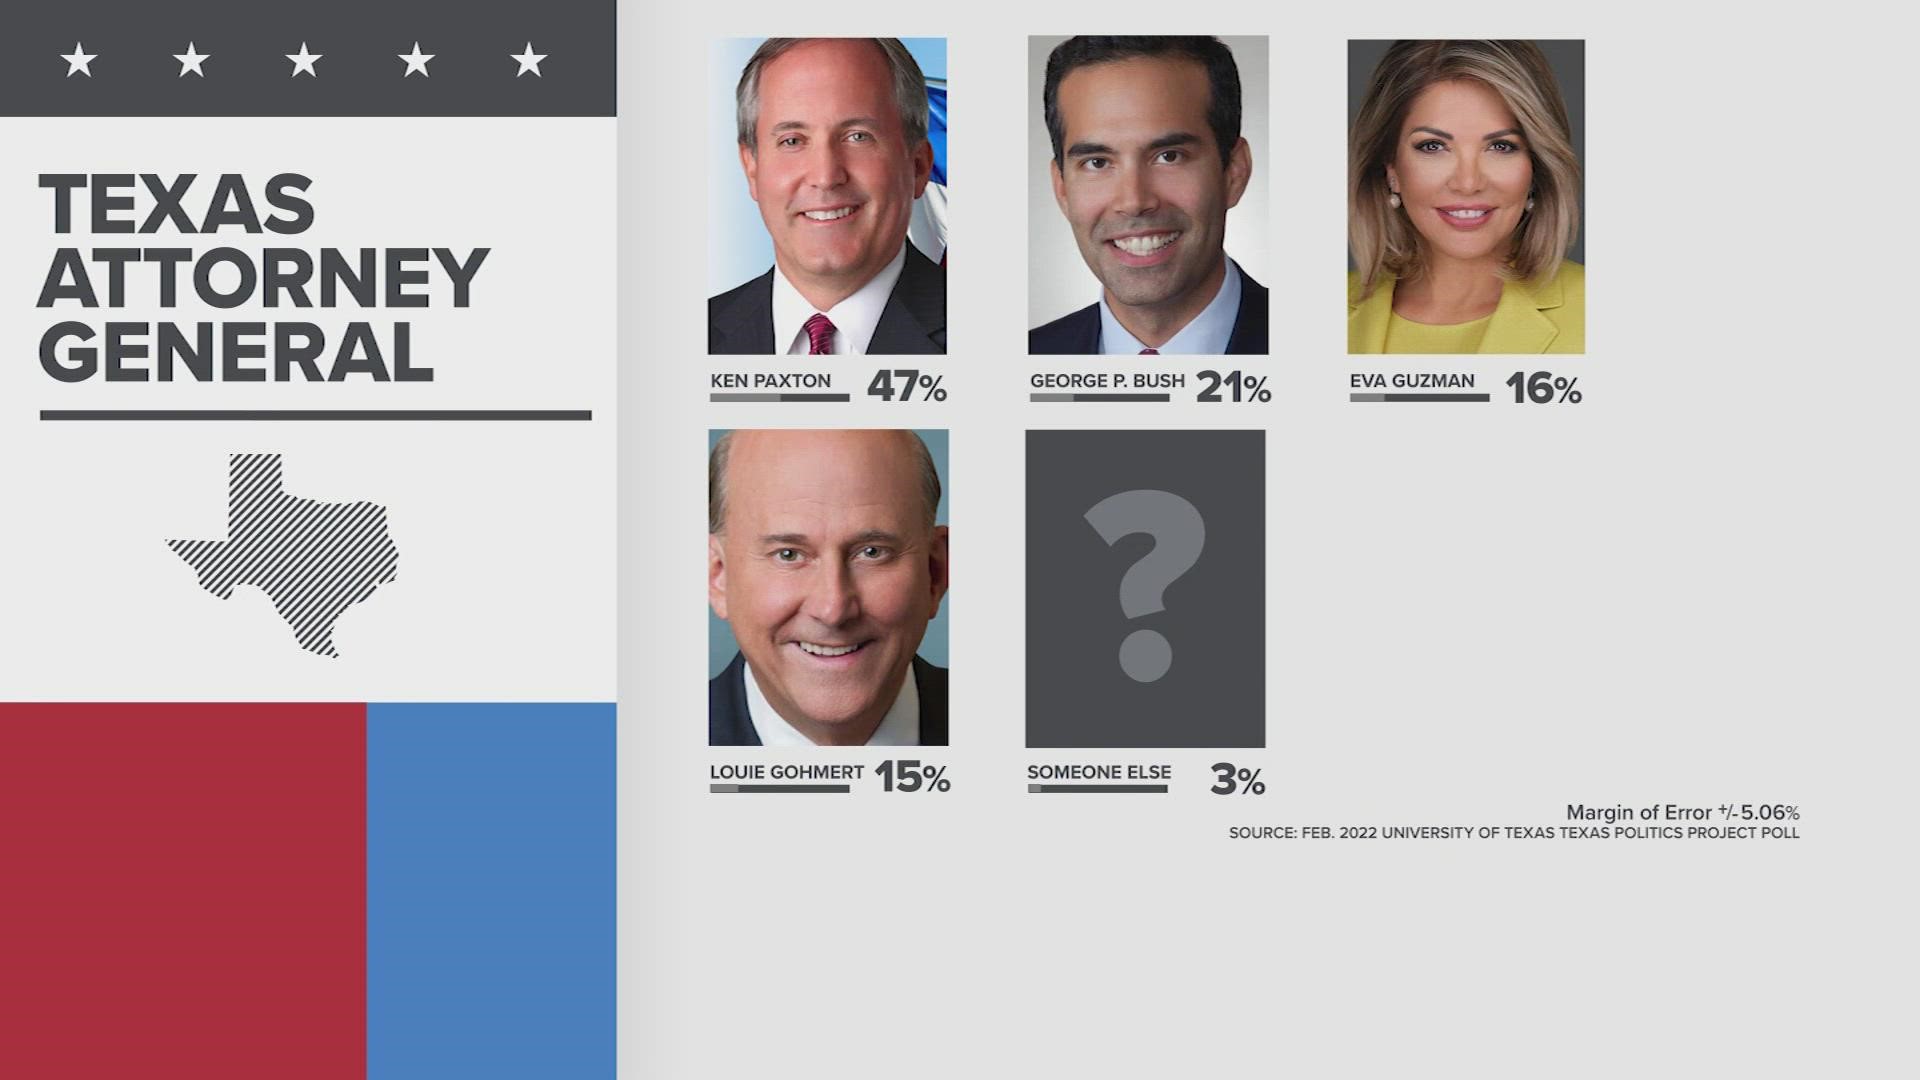 It looks like incumbent Texas Attorney General Ken Paxton will have a fight on his hands to retain his seat.